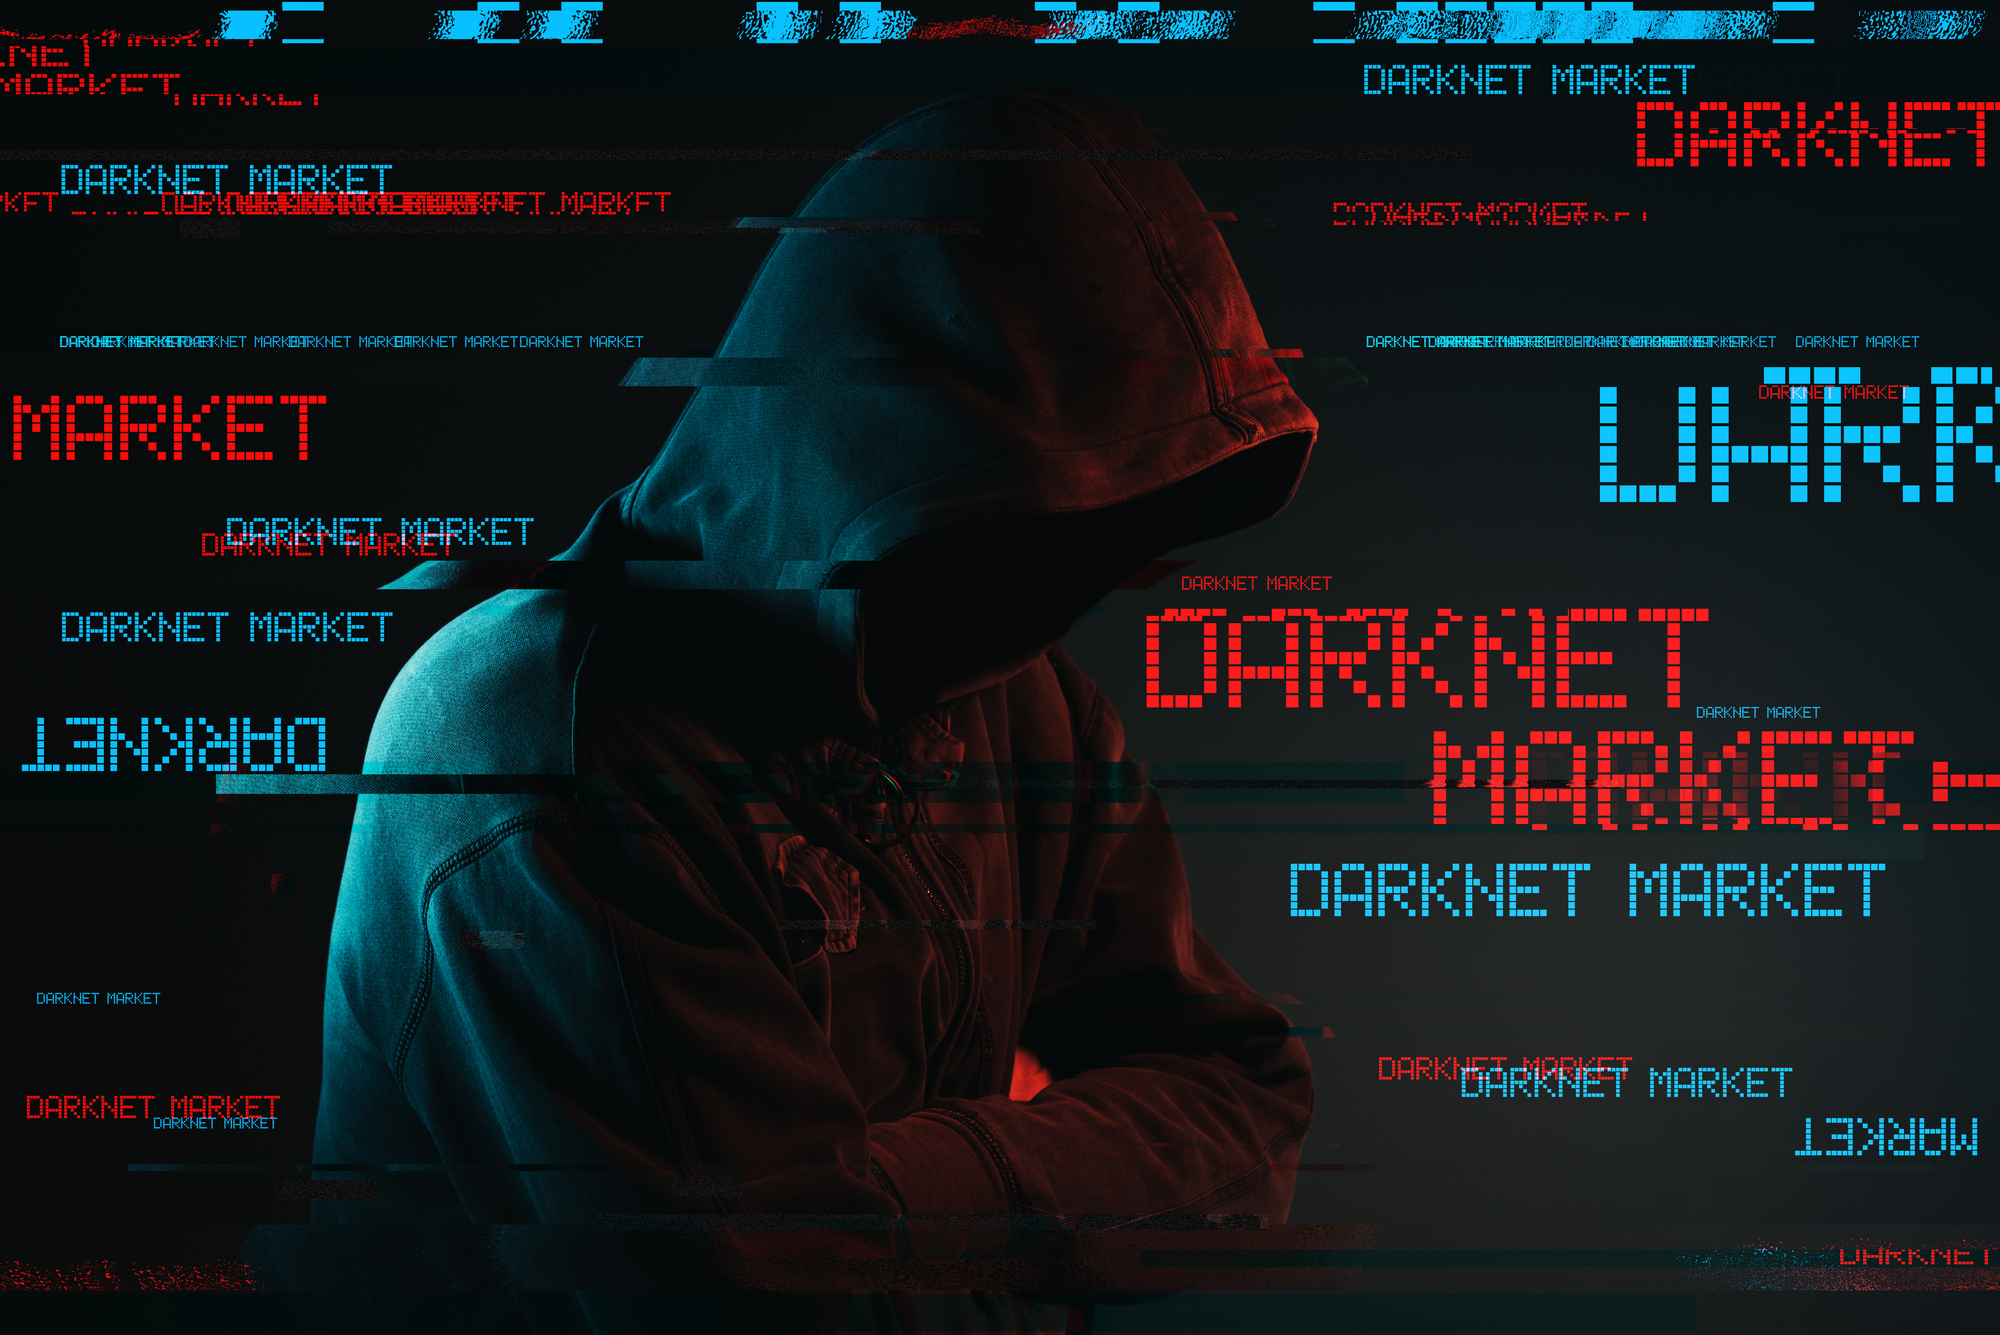 Darknet market concept with faceless hooded male person, low key red and blue lit image and digital glitch effect